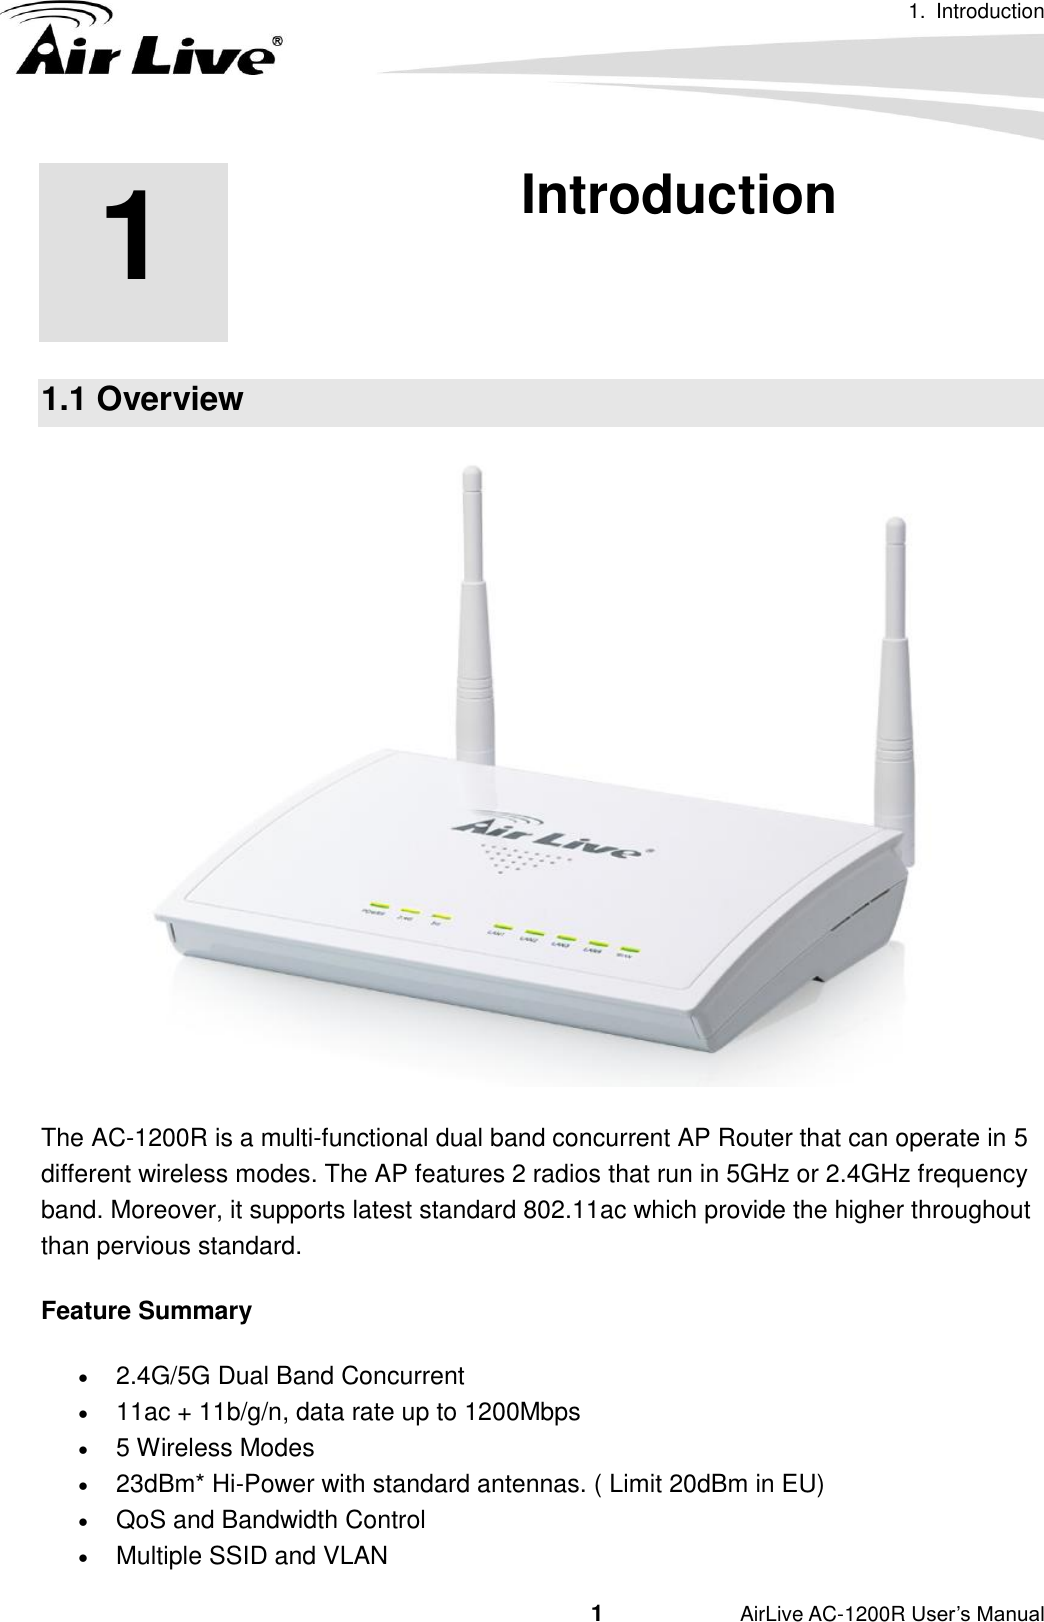 1.  Introduction                                         1           AirLive AC-1200R User’s Manual 1 1. Introduction  1.1 Overview  The AC-1200R is a multi-functional dual band concurrent AP Router that can operate in 5 different wireless modes. The AP features 2 radios that run in 5GHz or 2.4GHz frequency band. Moreover, it supports latest standard 802.11ac which provide the higher throughout than pervious standard.   Feature Summary  2.4G/5G Dual Band Concurrent    11ac + 11b/g/n, data rate up to 1200Mbps    5 Wireless Modes    23dBm* Hi-Power with standard antennas. ( Limit 20dBm in EU)  QoS and Bandwidth Control    Multiple SSID and VLAN 